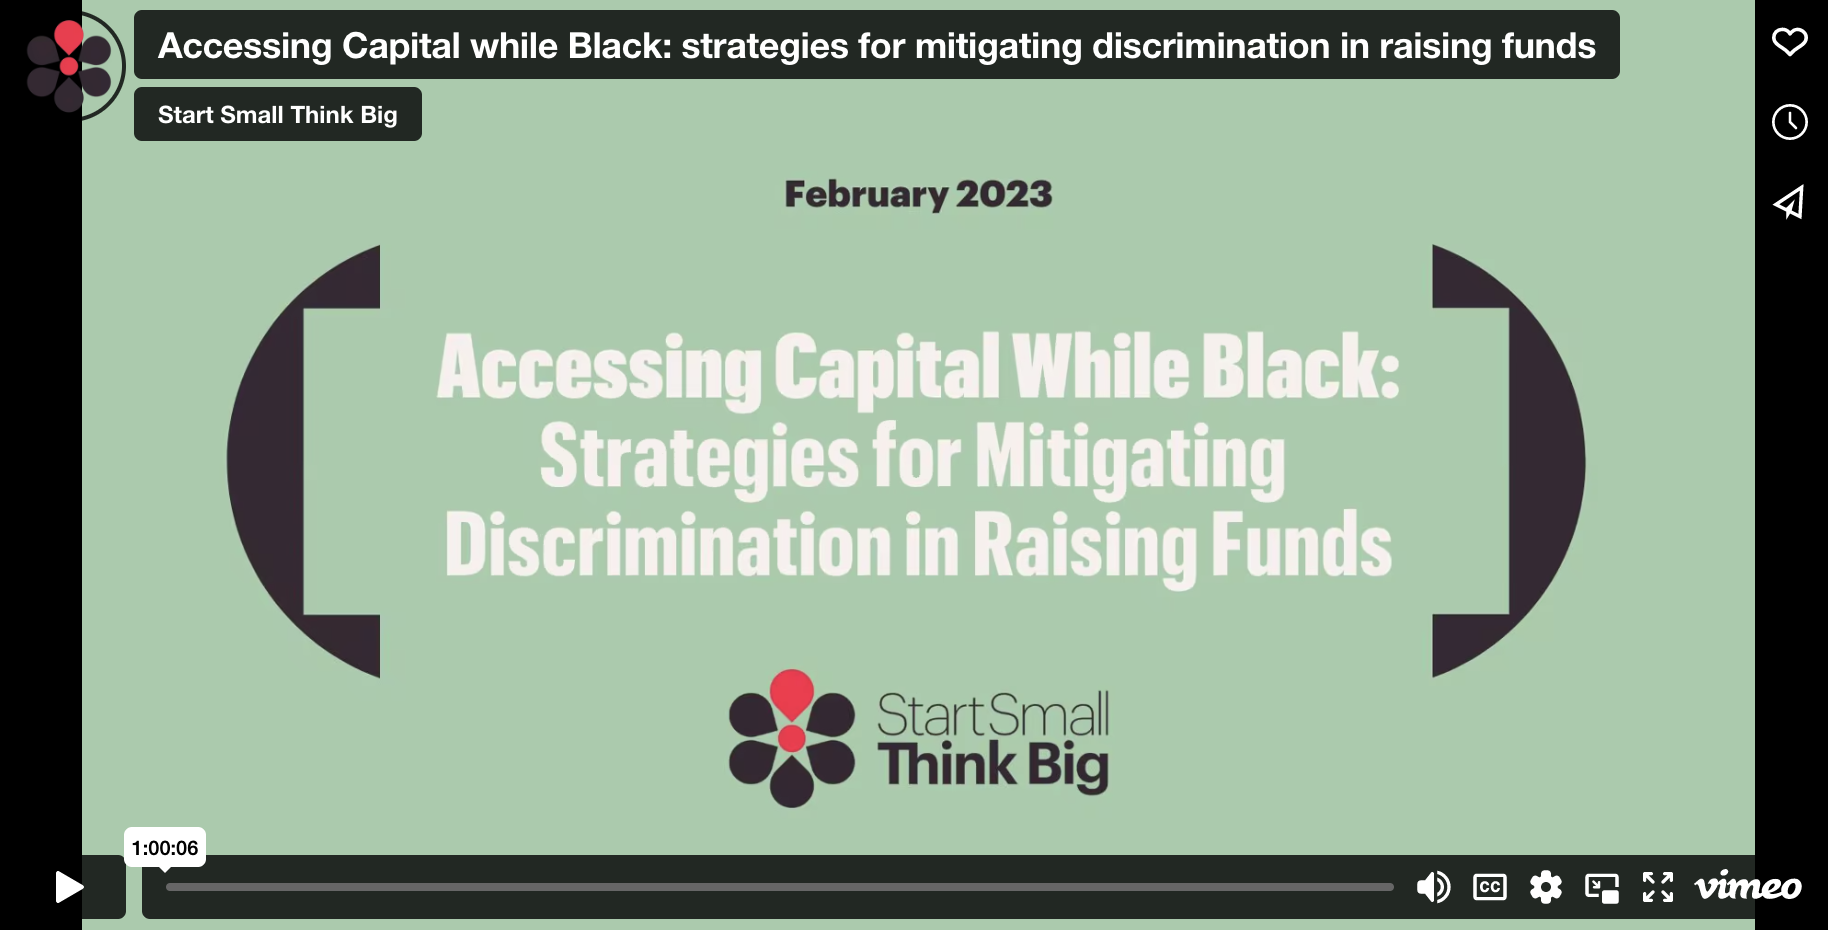 Accessing Capital while Black: strategies for mitigating discrimination in raising funds